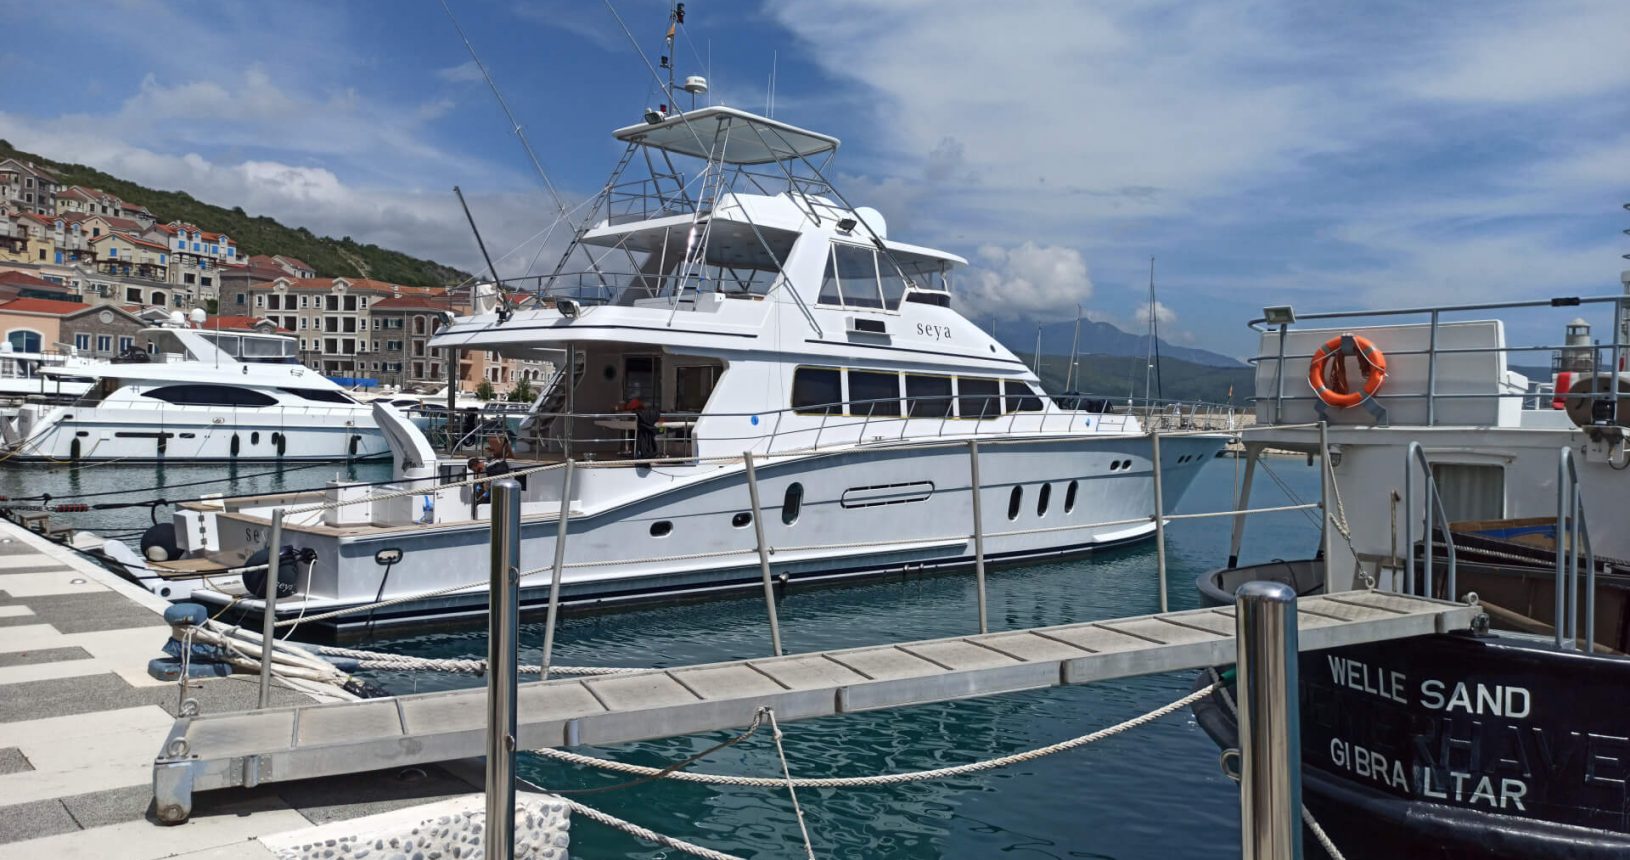 Lustica Bay yachts in the port